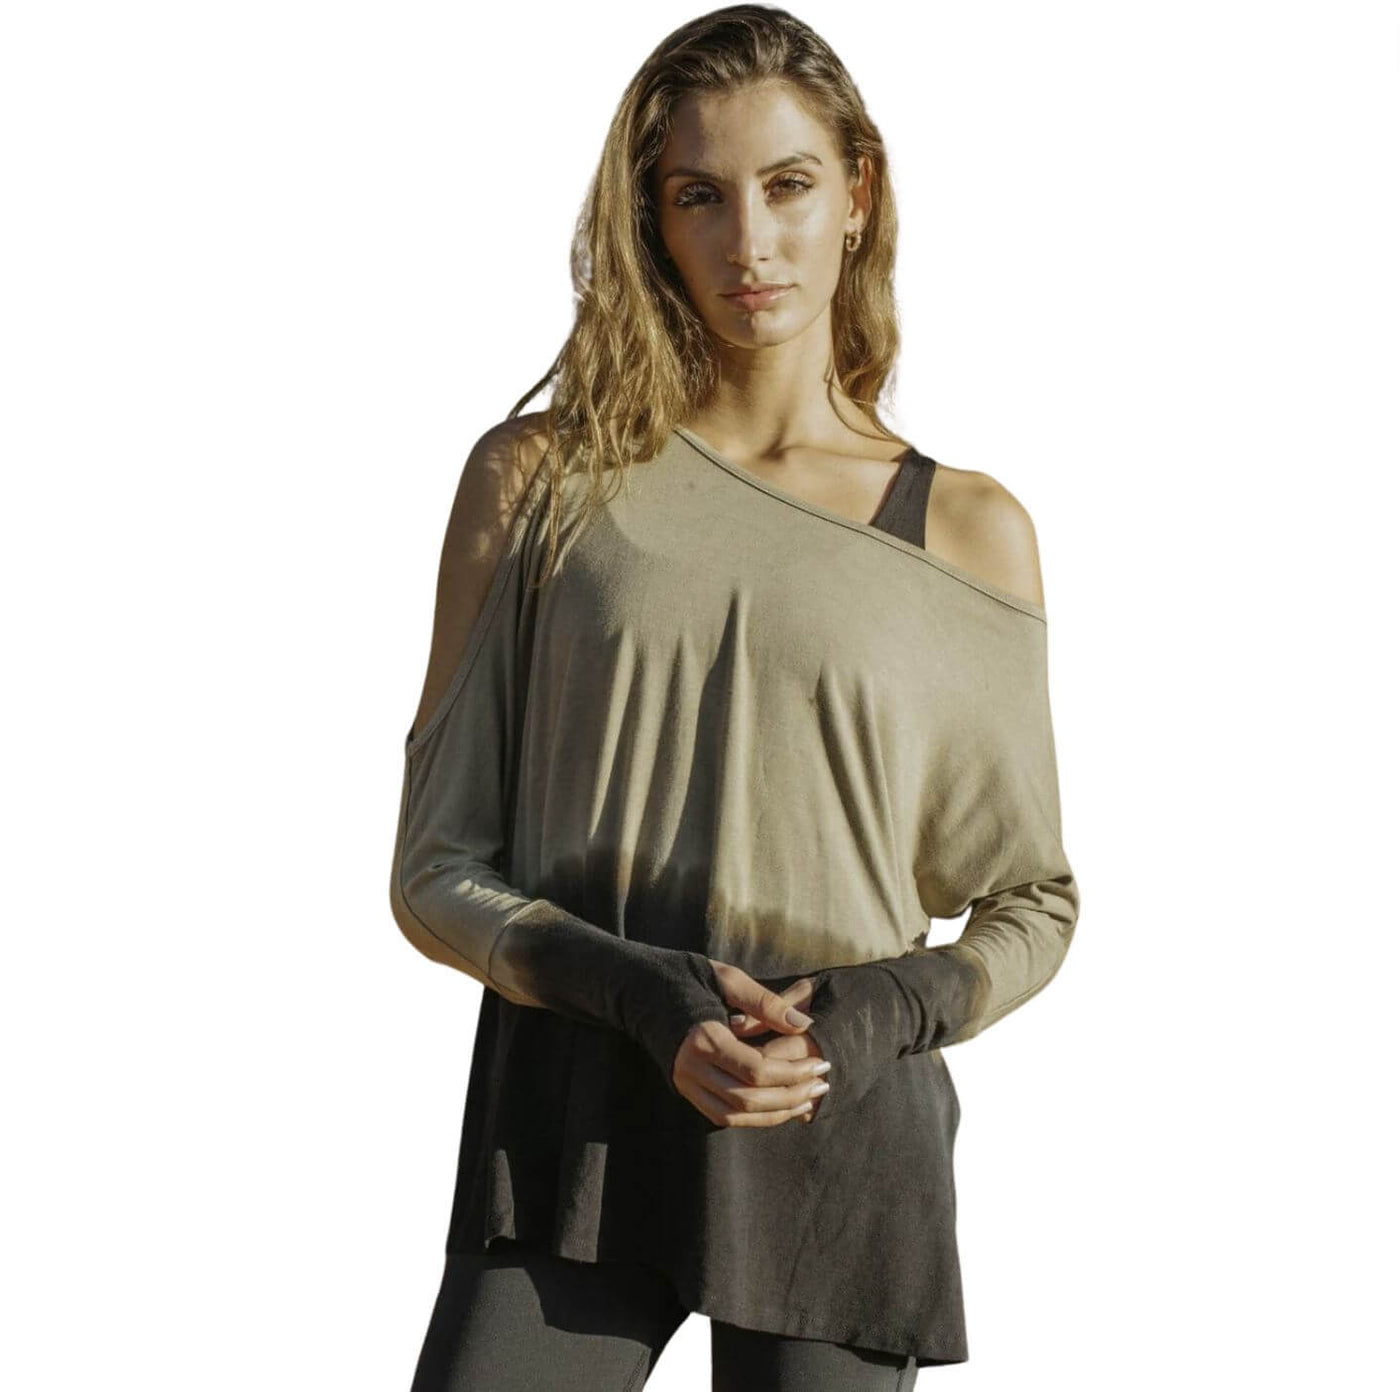 Jala Women's Duo Pullover with Cold Shoulder on one side and Off the Shoulder on the Other in Midnight River |Style#DUO28-MR| Made in USA | Classy Cozy Cool Women's Made in America Clothing Boutique